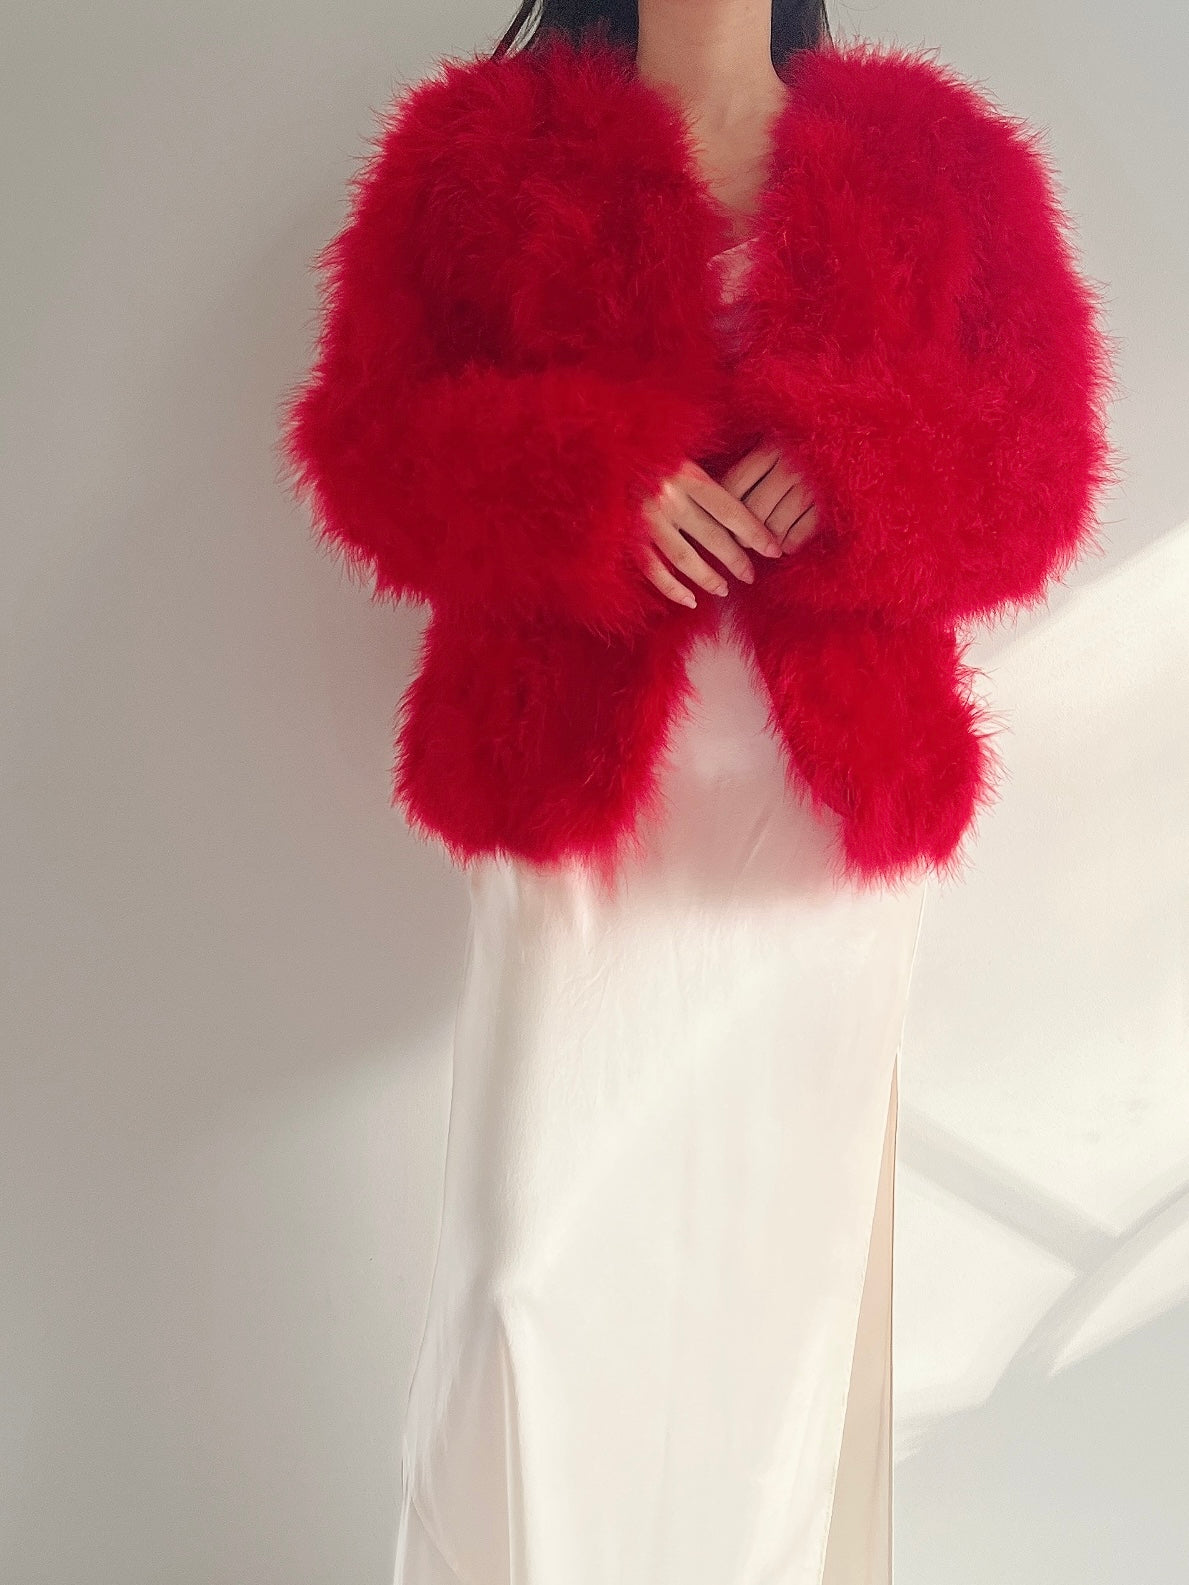 Vintage Red Feather Jacket - S/M